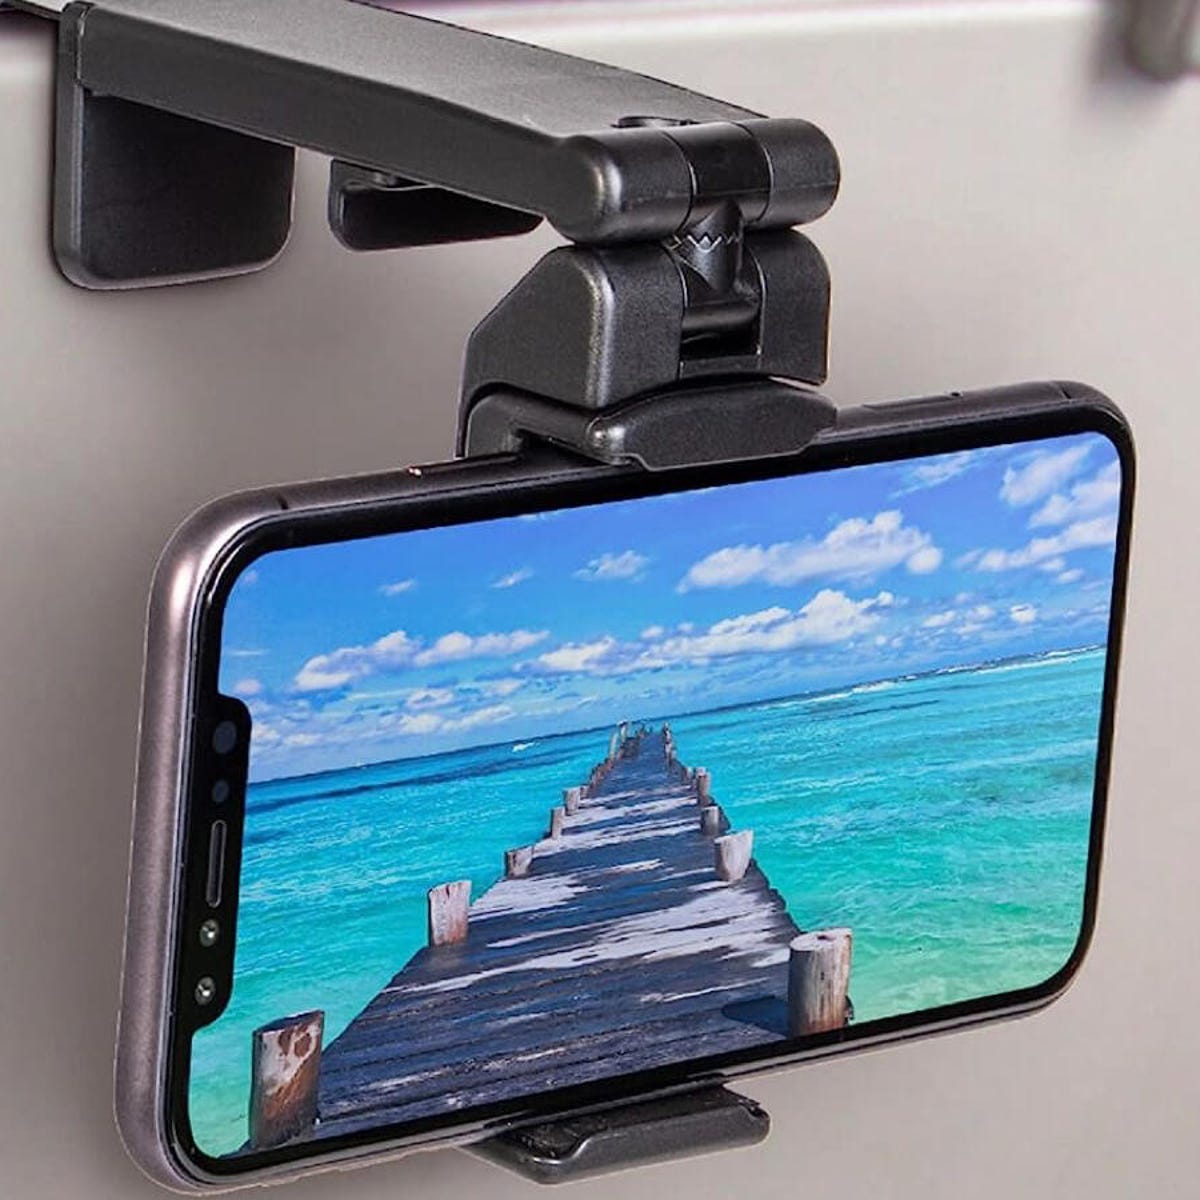 Epic Cyber Monday Deal: This $10 Phone Holder Will Change the